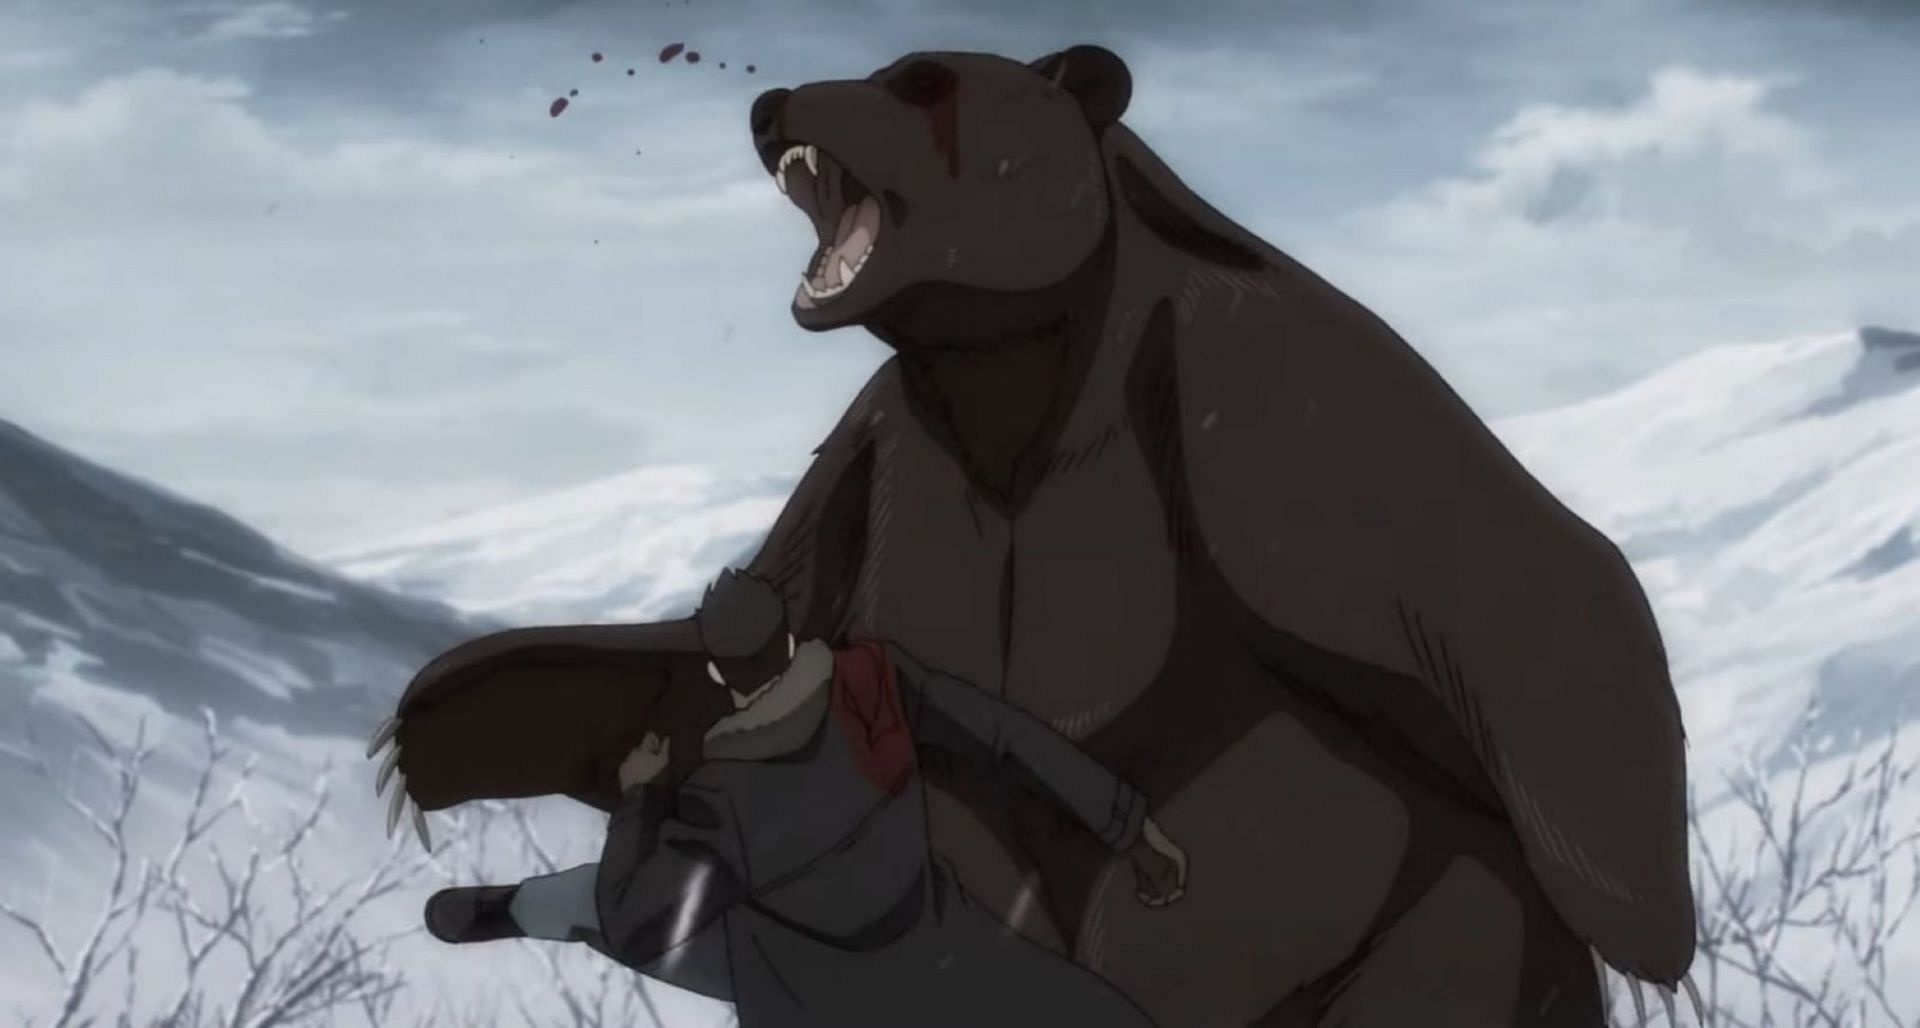 Juzo fights a grizzly bear, as seen in the trailer (Image via Netflix)